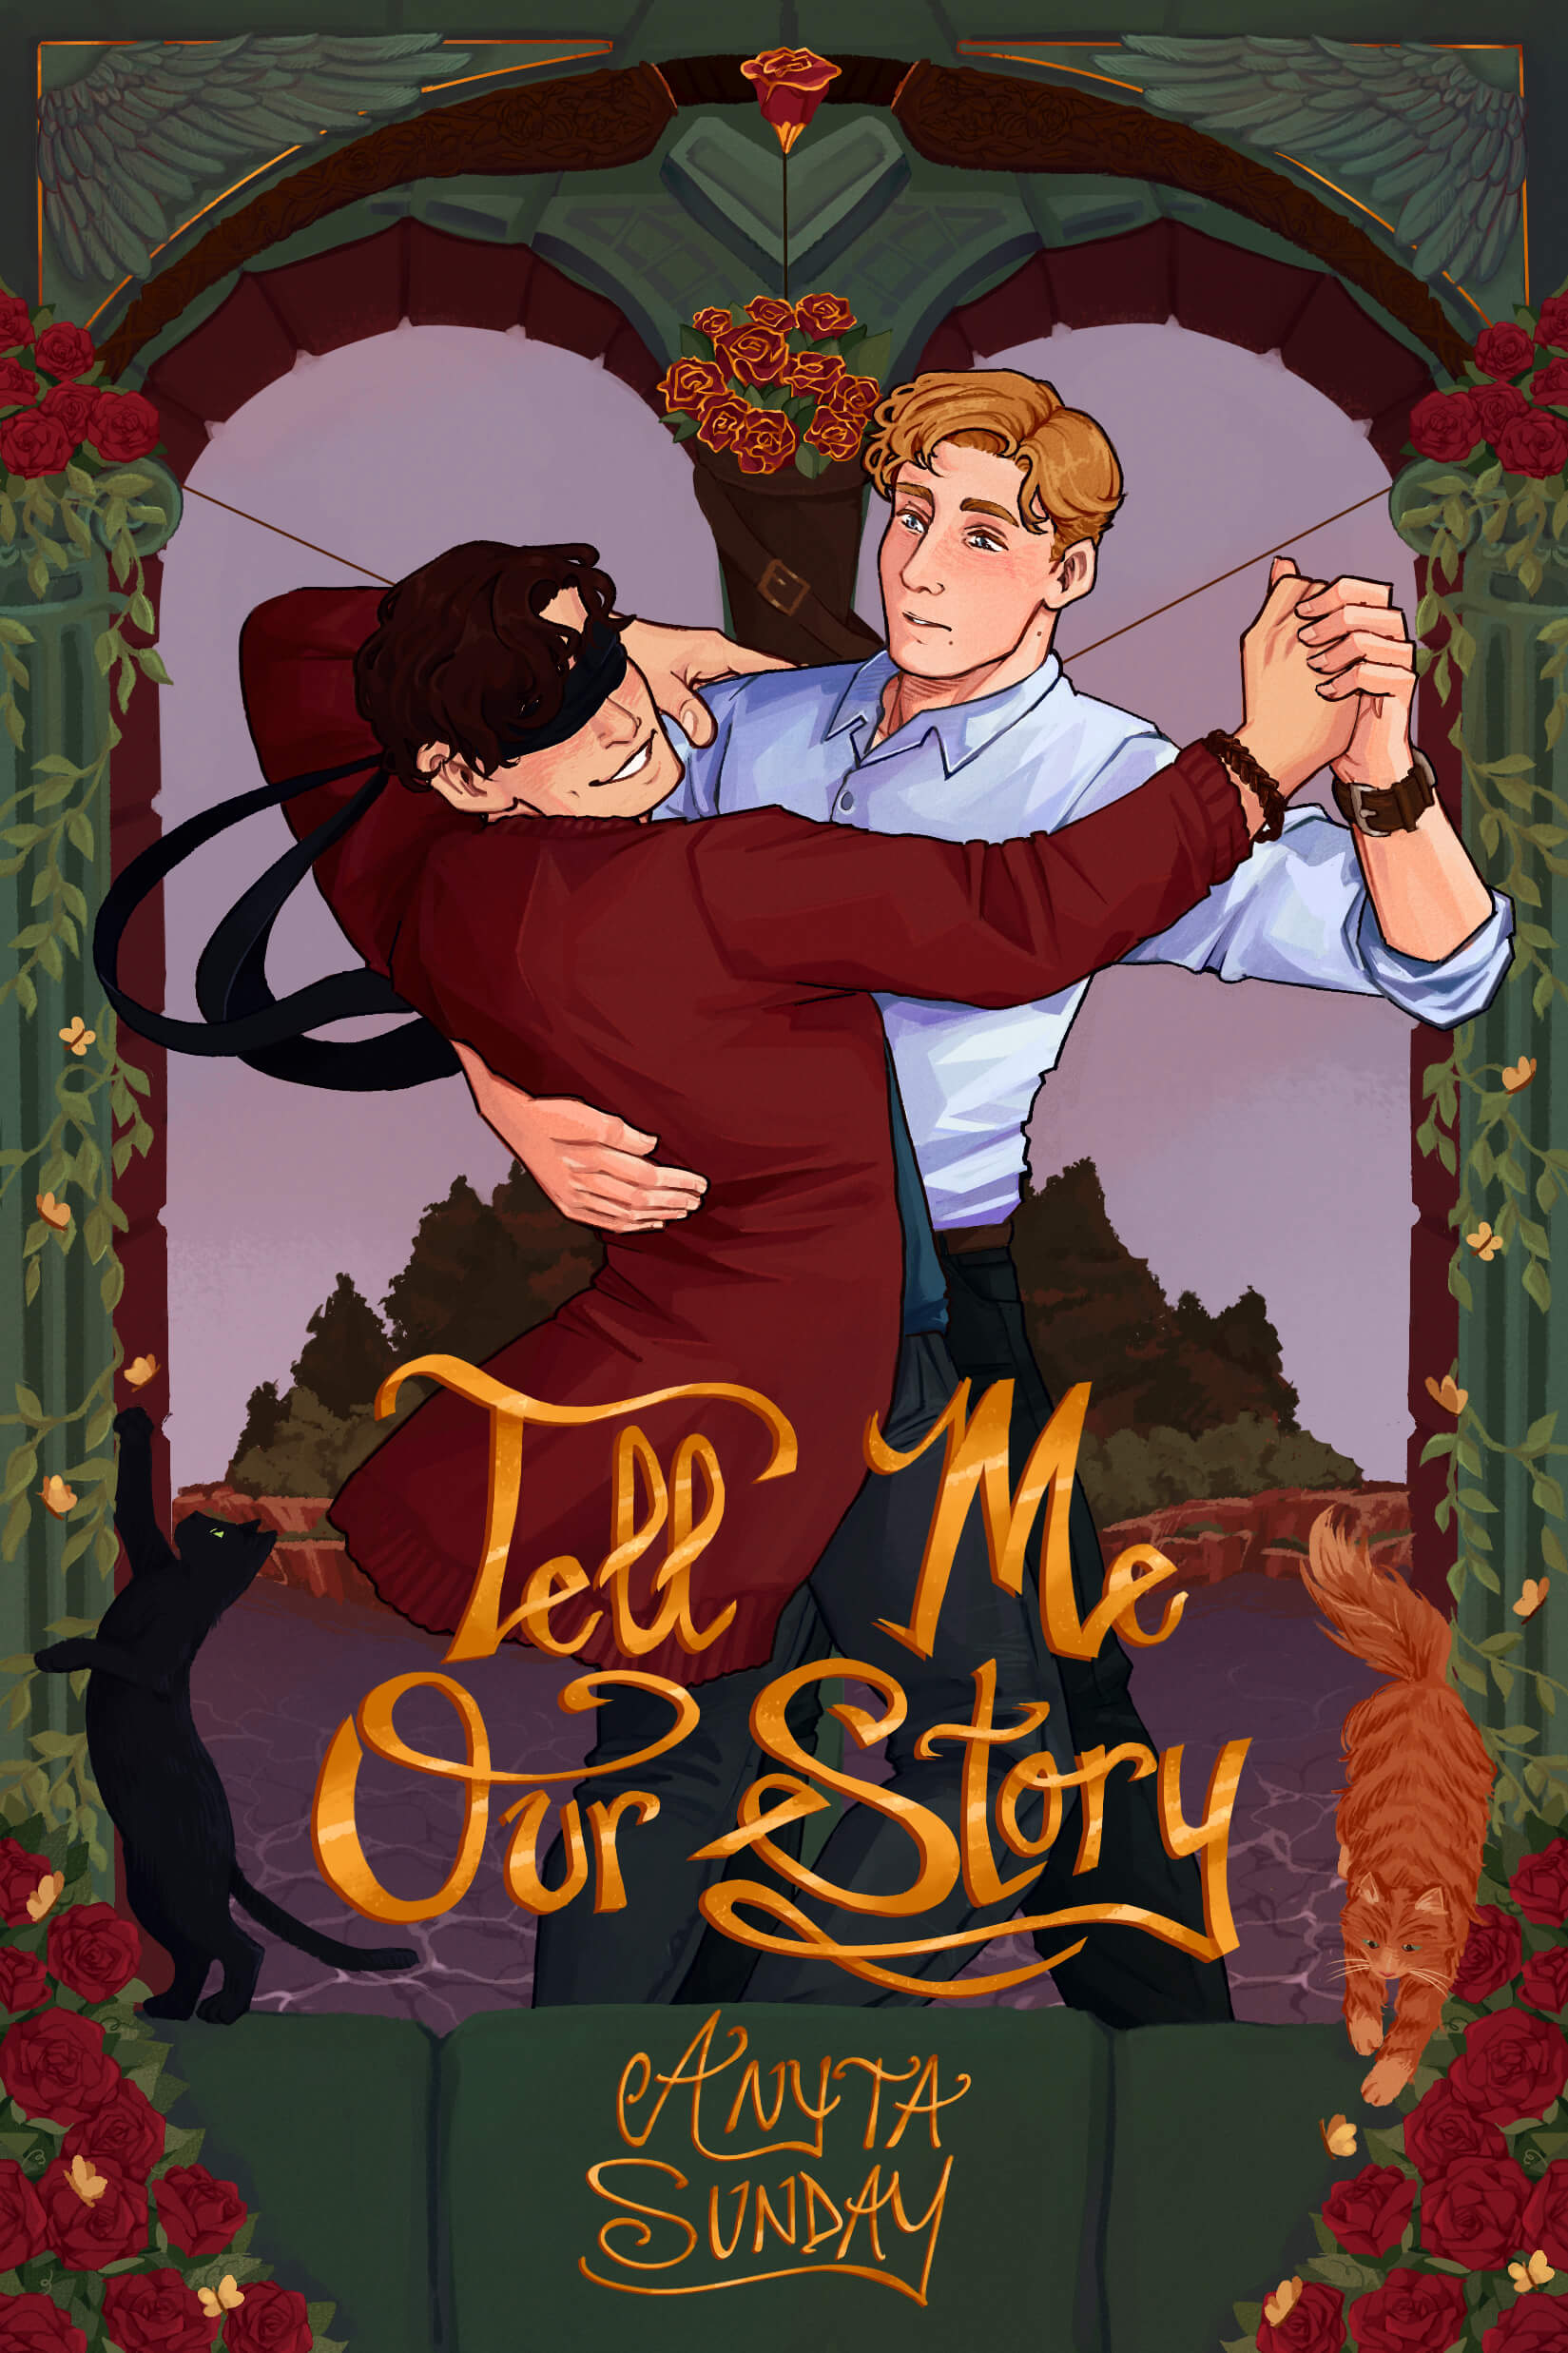 "Tell Me Our Story" is a second chance, friends-to-lovers gay romance by New Zealand writer Anyta Sunday. This is a standalone, no cliffhanger story with HEA.